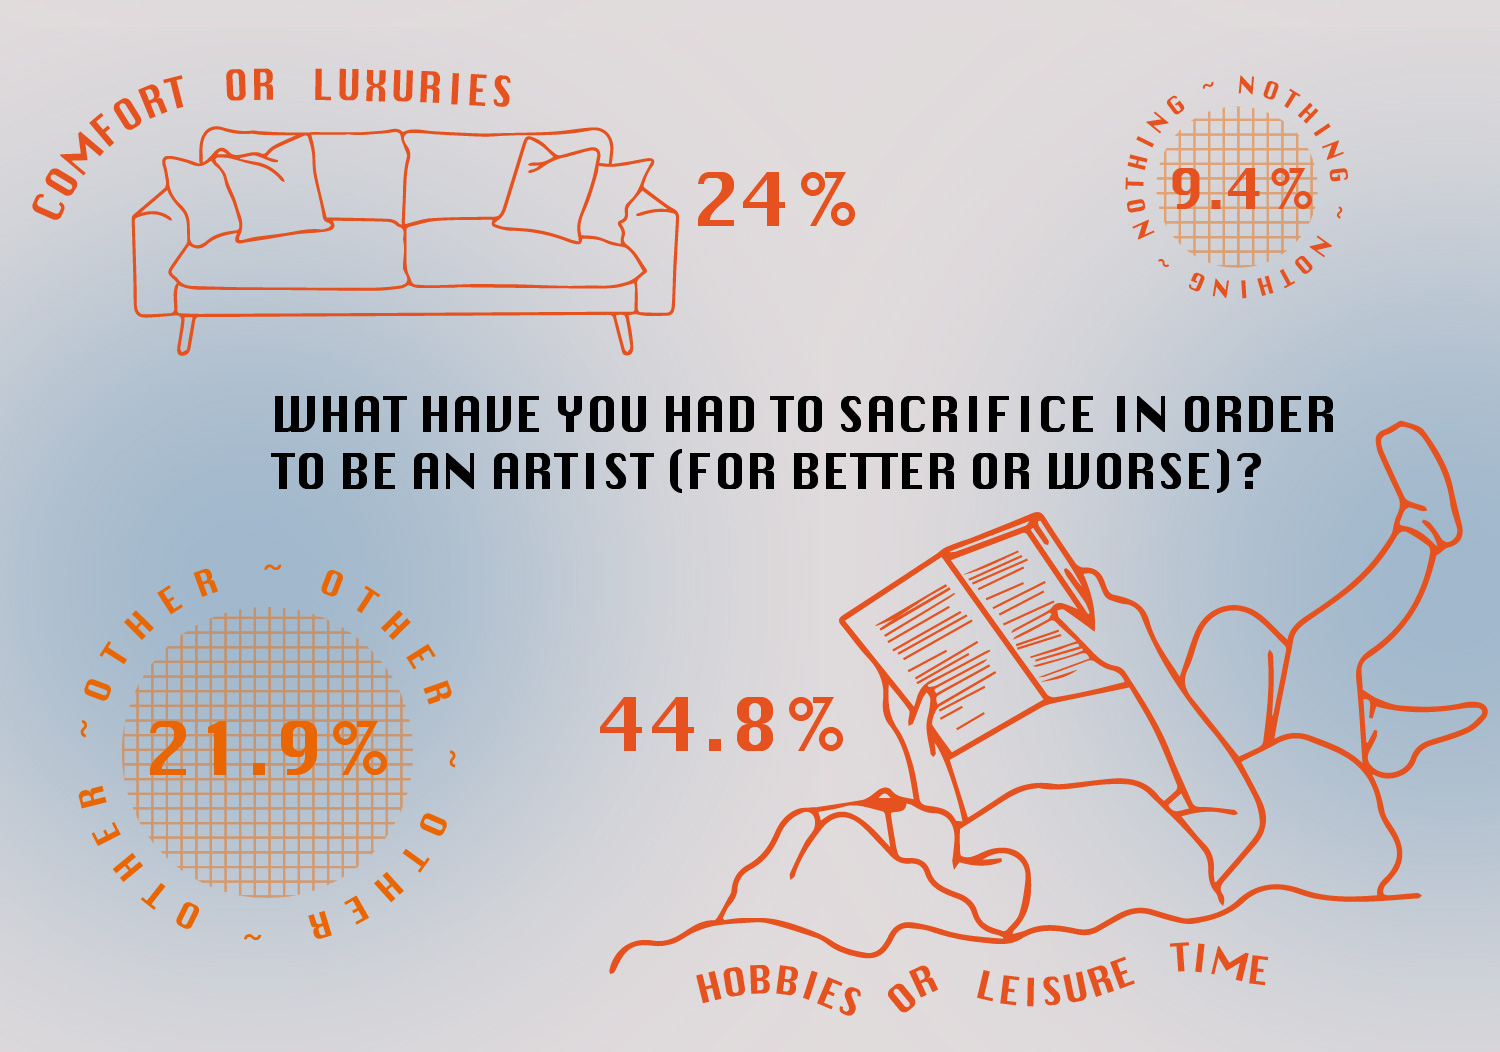 What have you had to sacrifice in order to be an artist (For better or worse)?